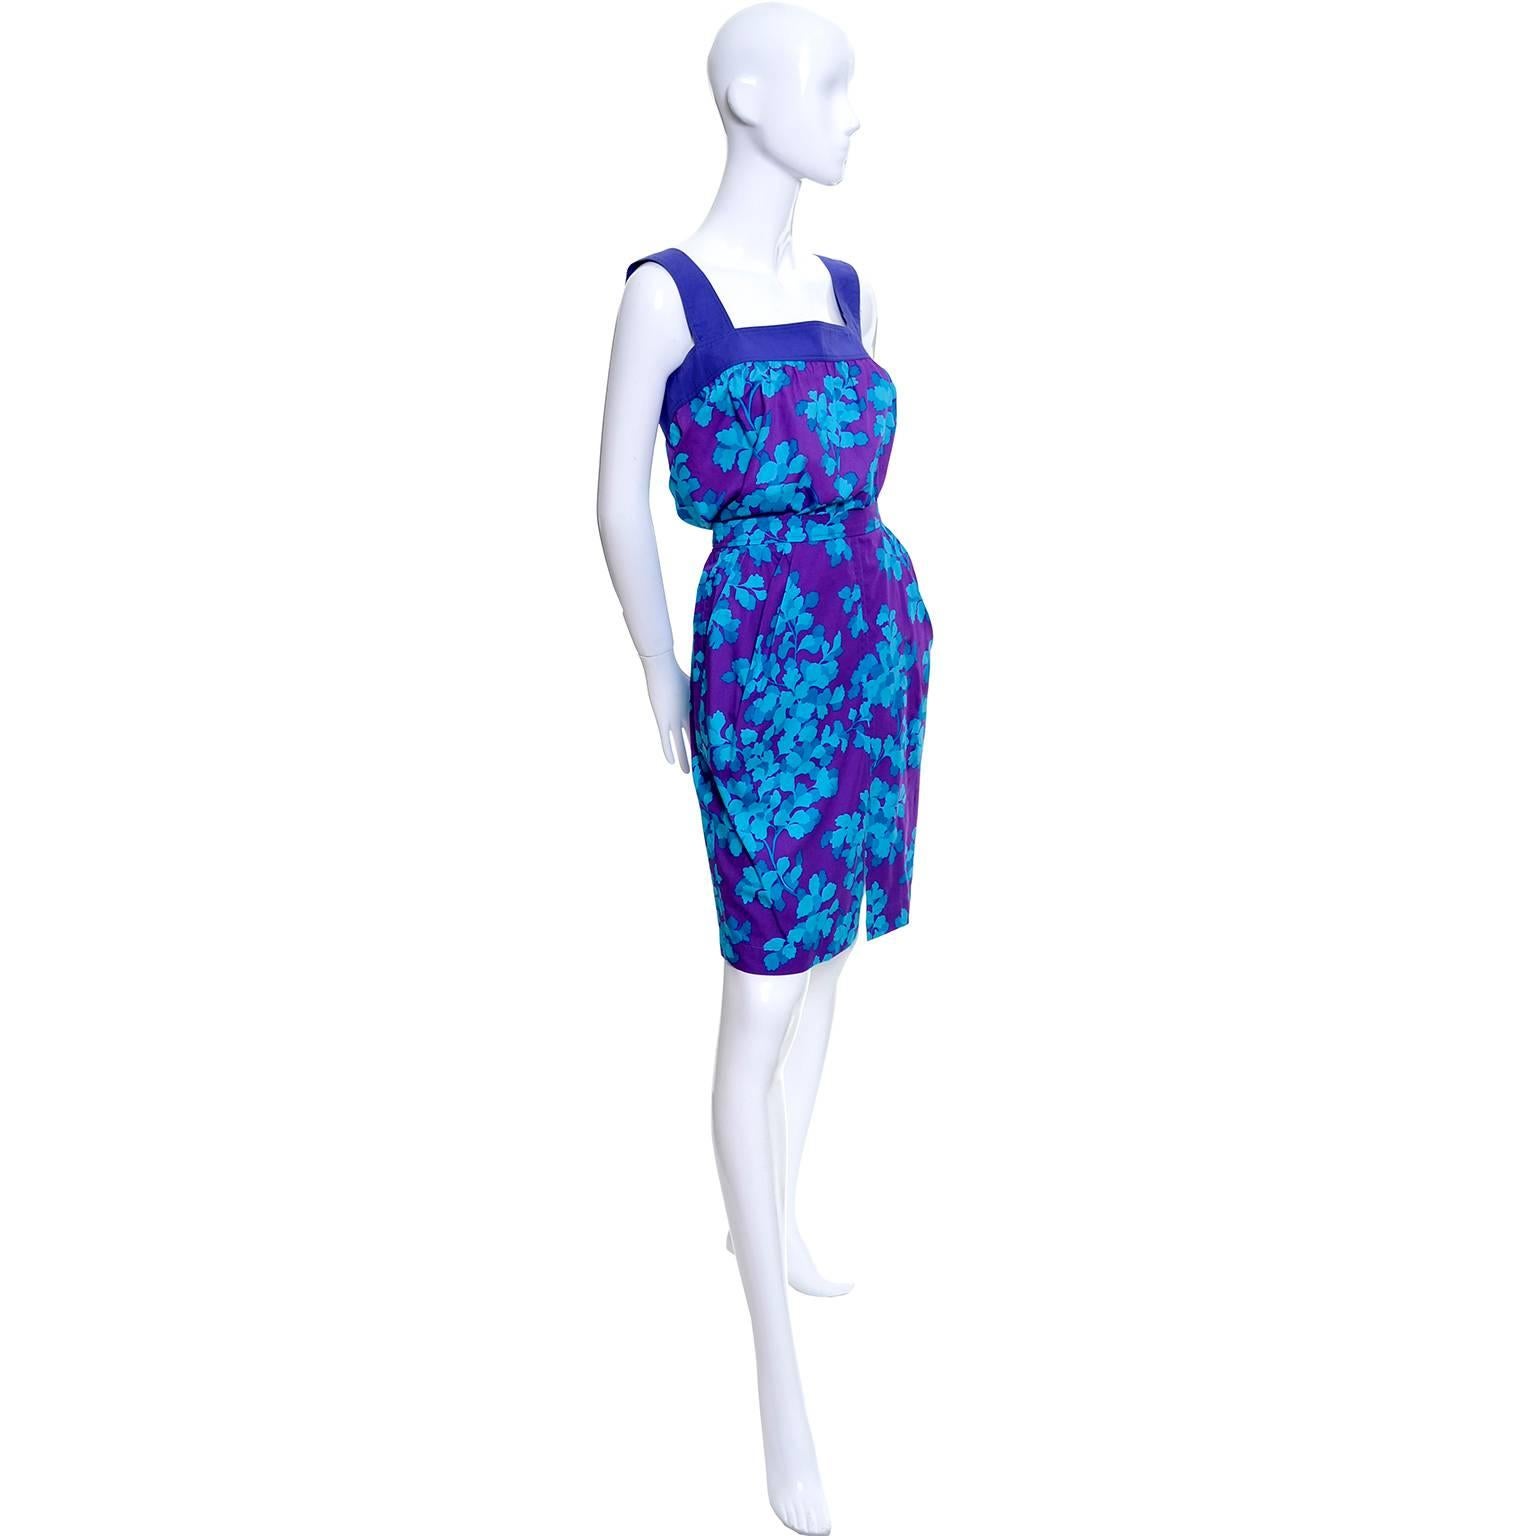 I really love this pretty cotton floral 2 piece dress from YSL! The floral print is in shades of blue and purple, and the skirt has side pleats, side slit pockets, a side zipper and a 7